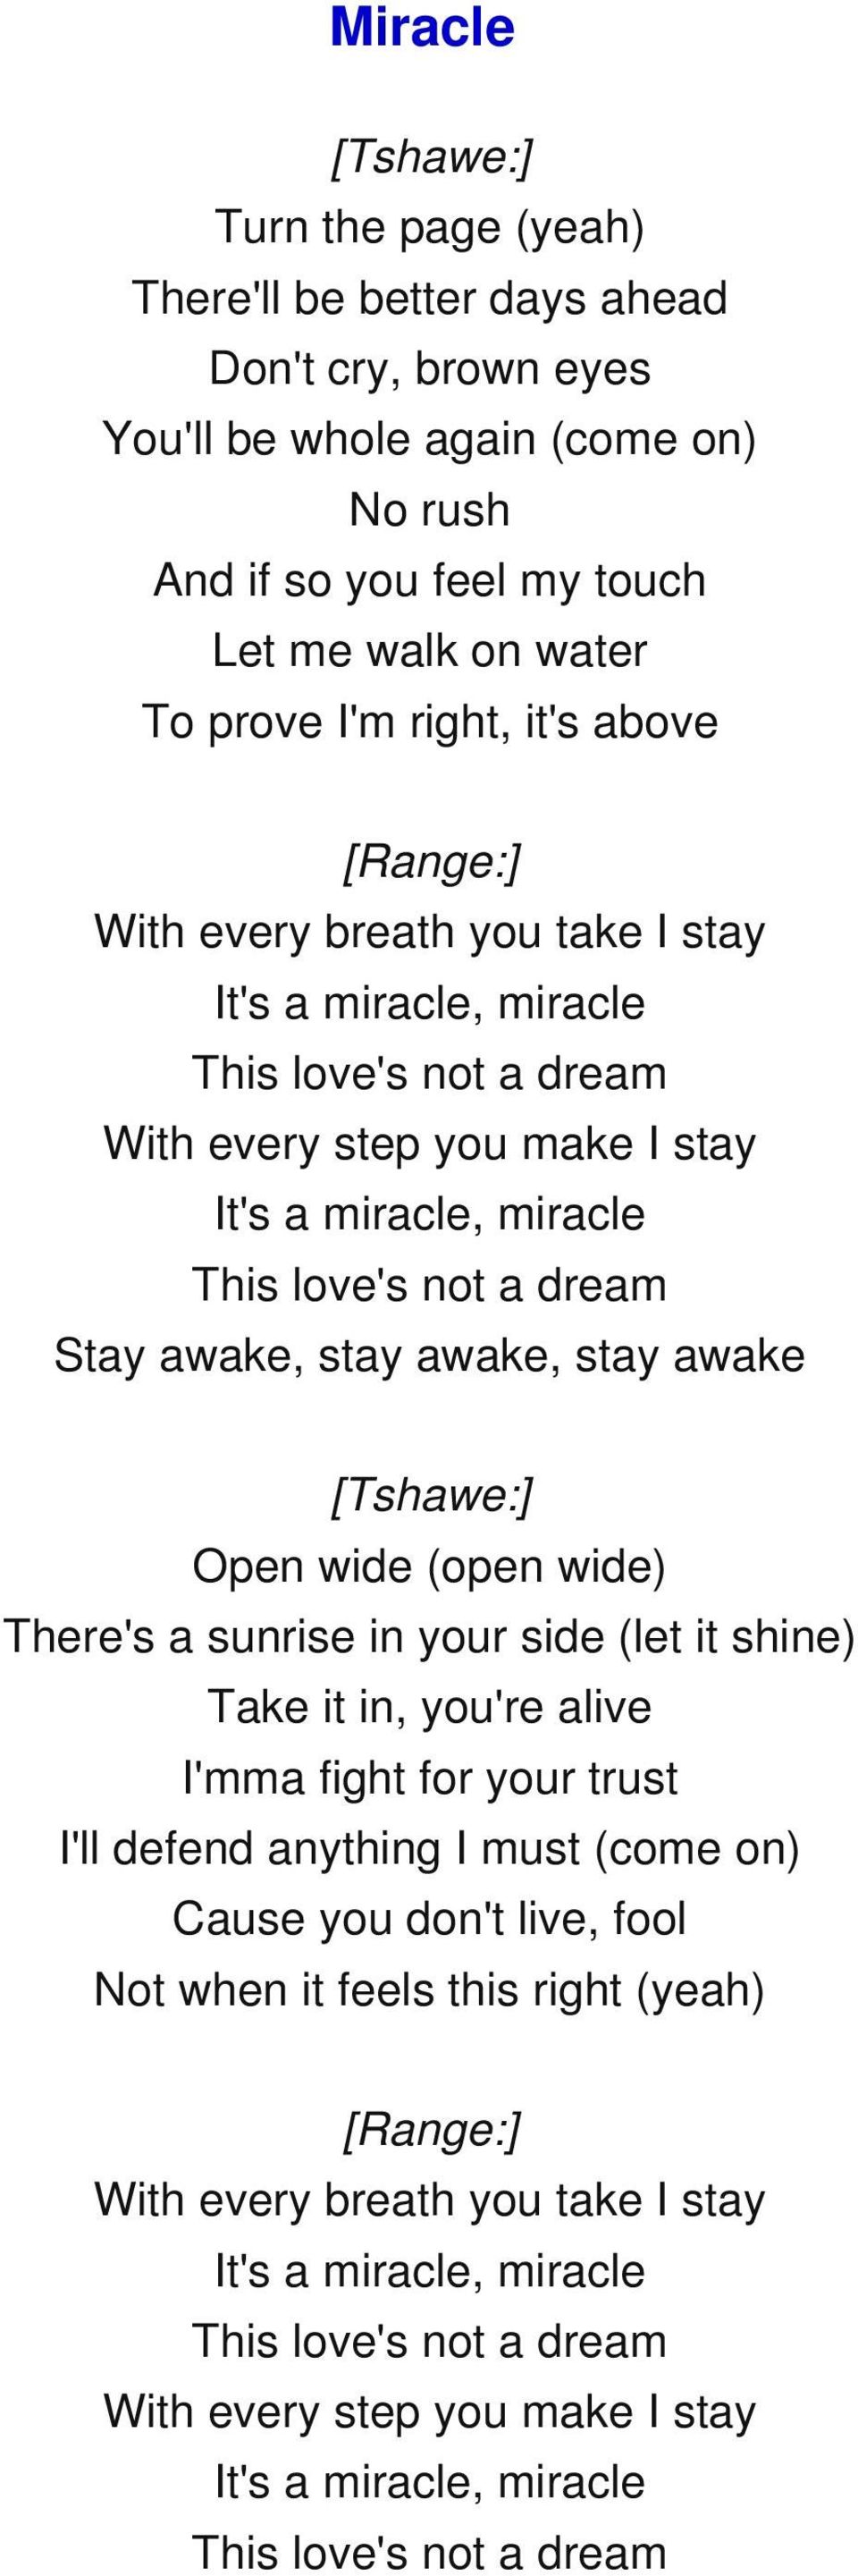 awake, stay awake [Tshawe:] Open wide (open wide) There's a sunrise in your side (let it shine) Take it in, you're alive I'mma fight for your trust I'll defend anything I must (come on) Cause you